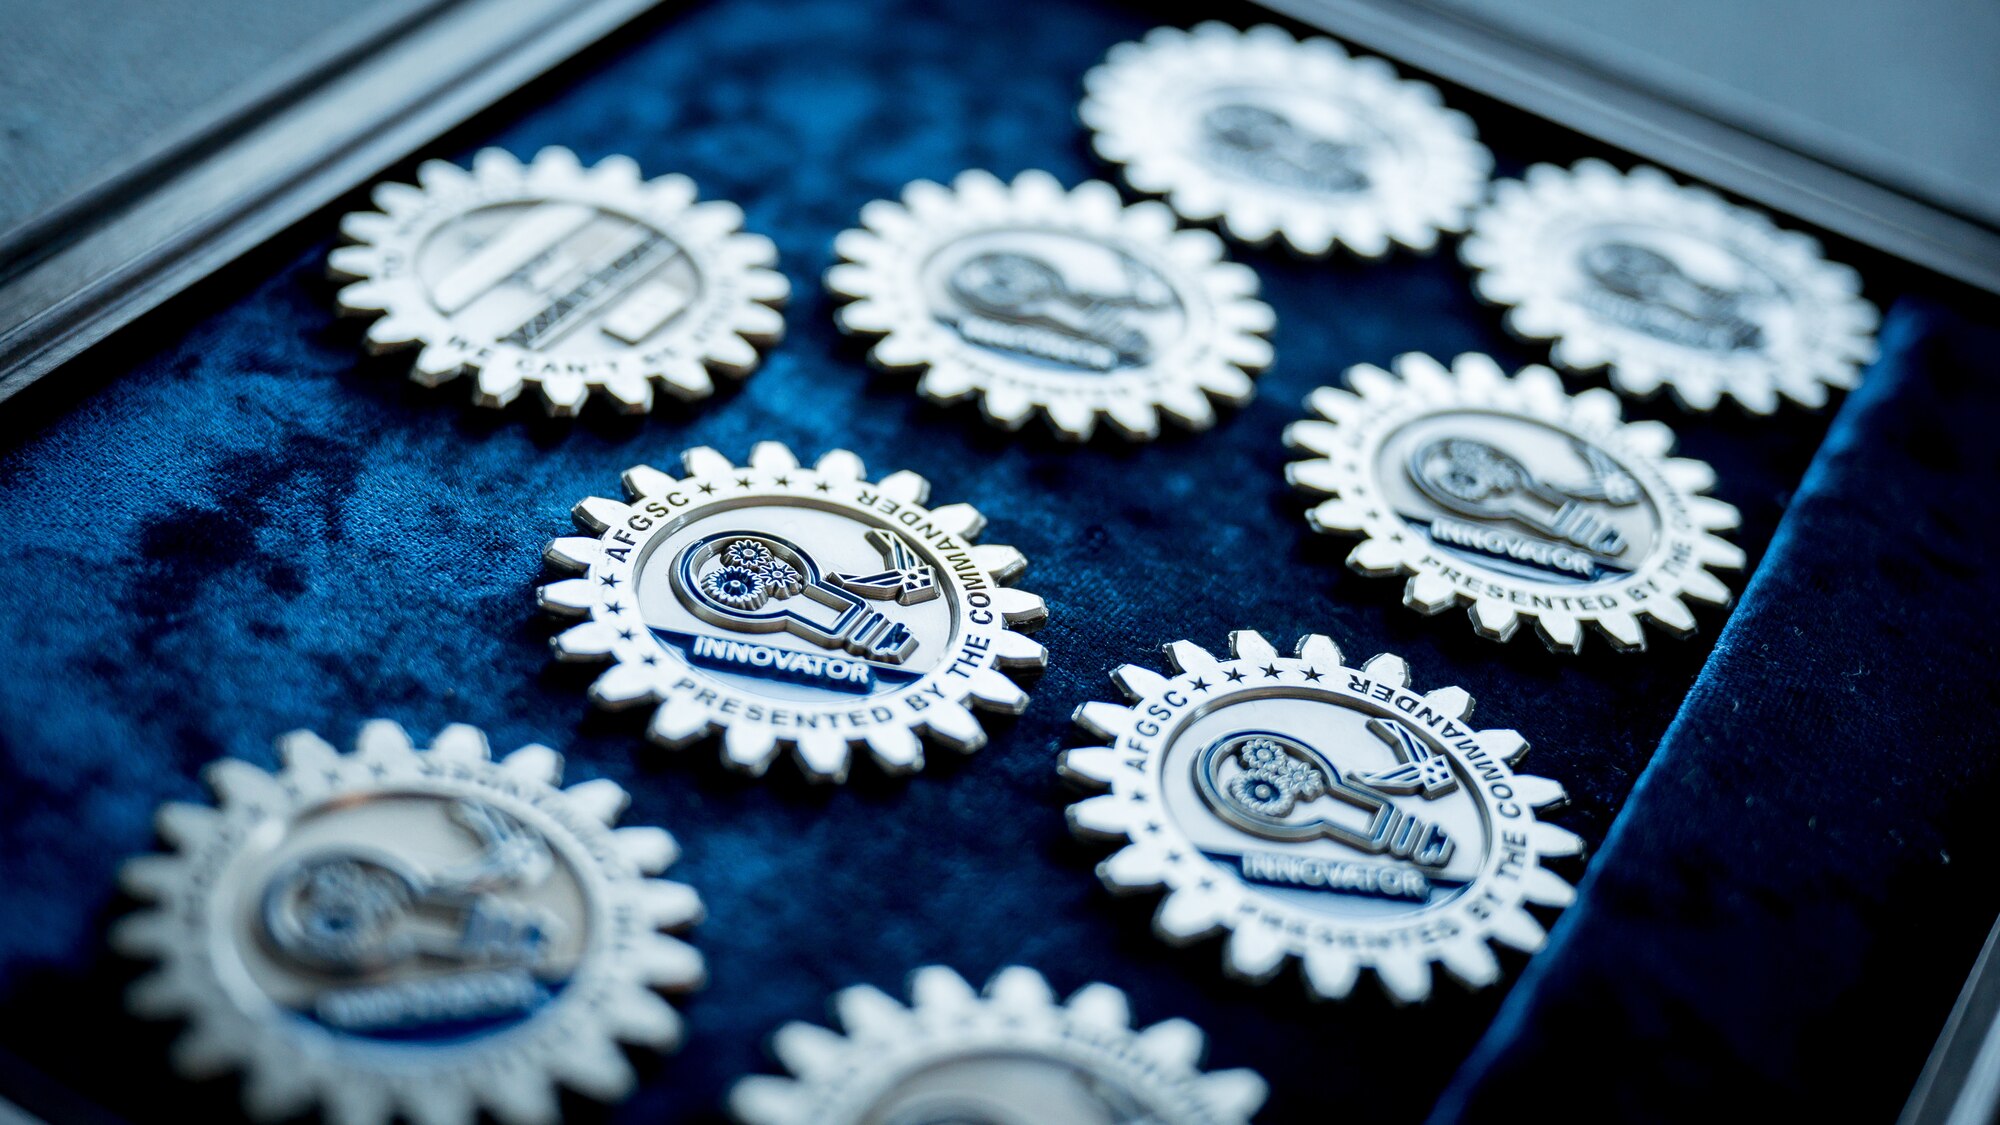 Photo detail of AFGSC coins.